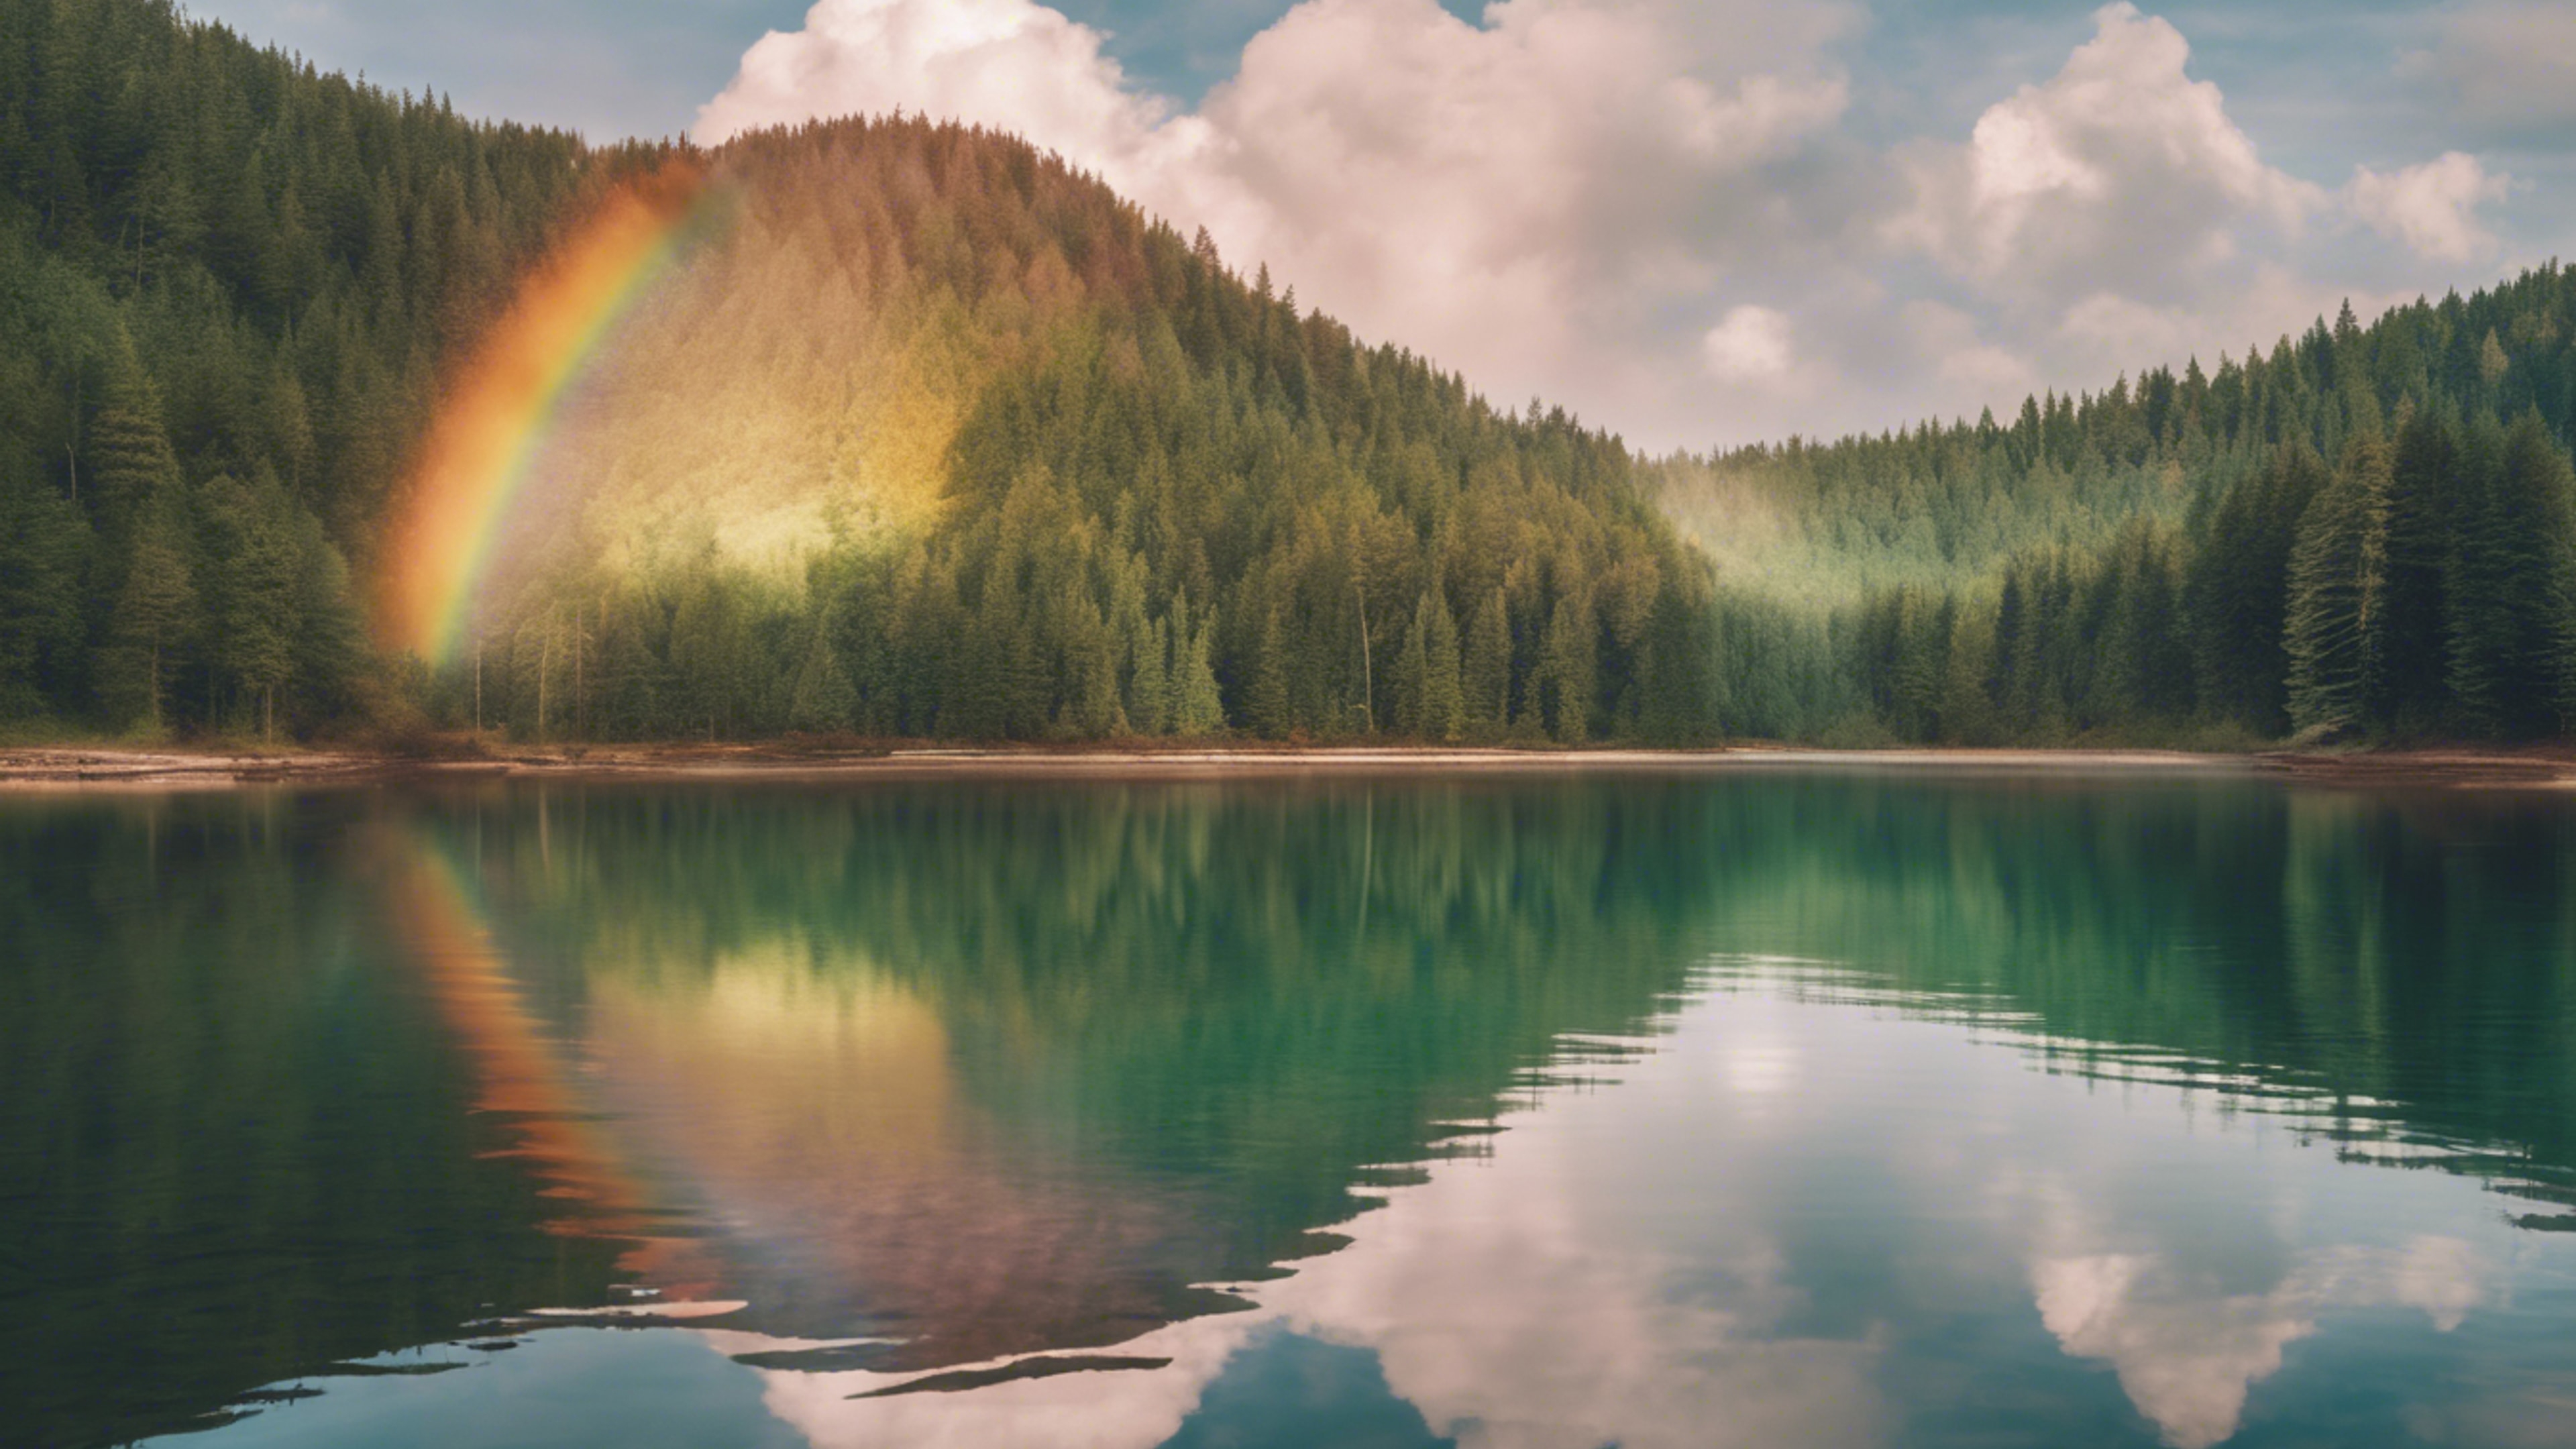 A giant boho rainbow reflected in a tranquil, crystal-clear lake. Wallpaper[1eb8941fdb7d4f2d8de5]